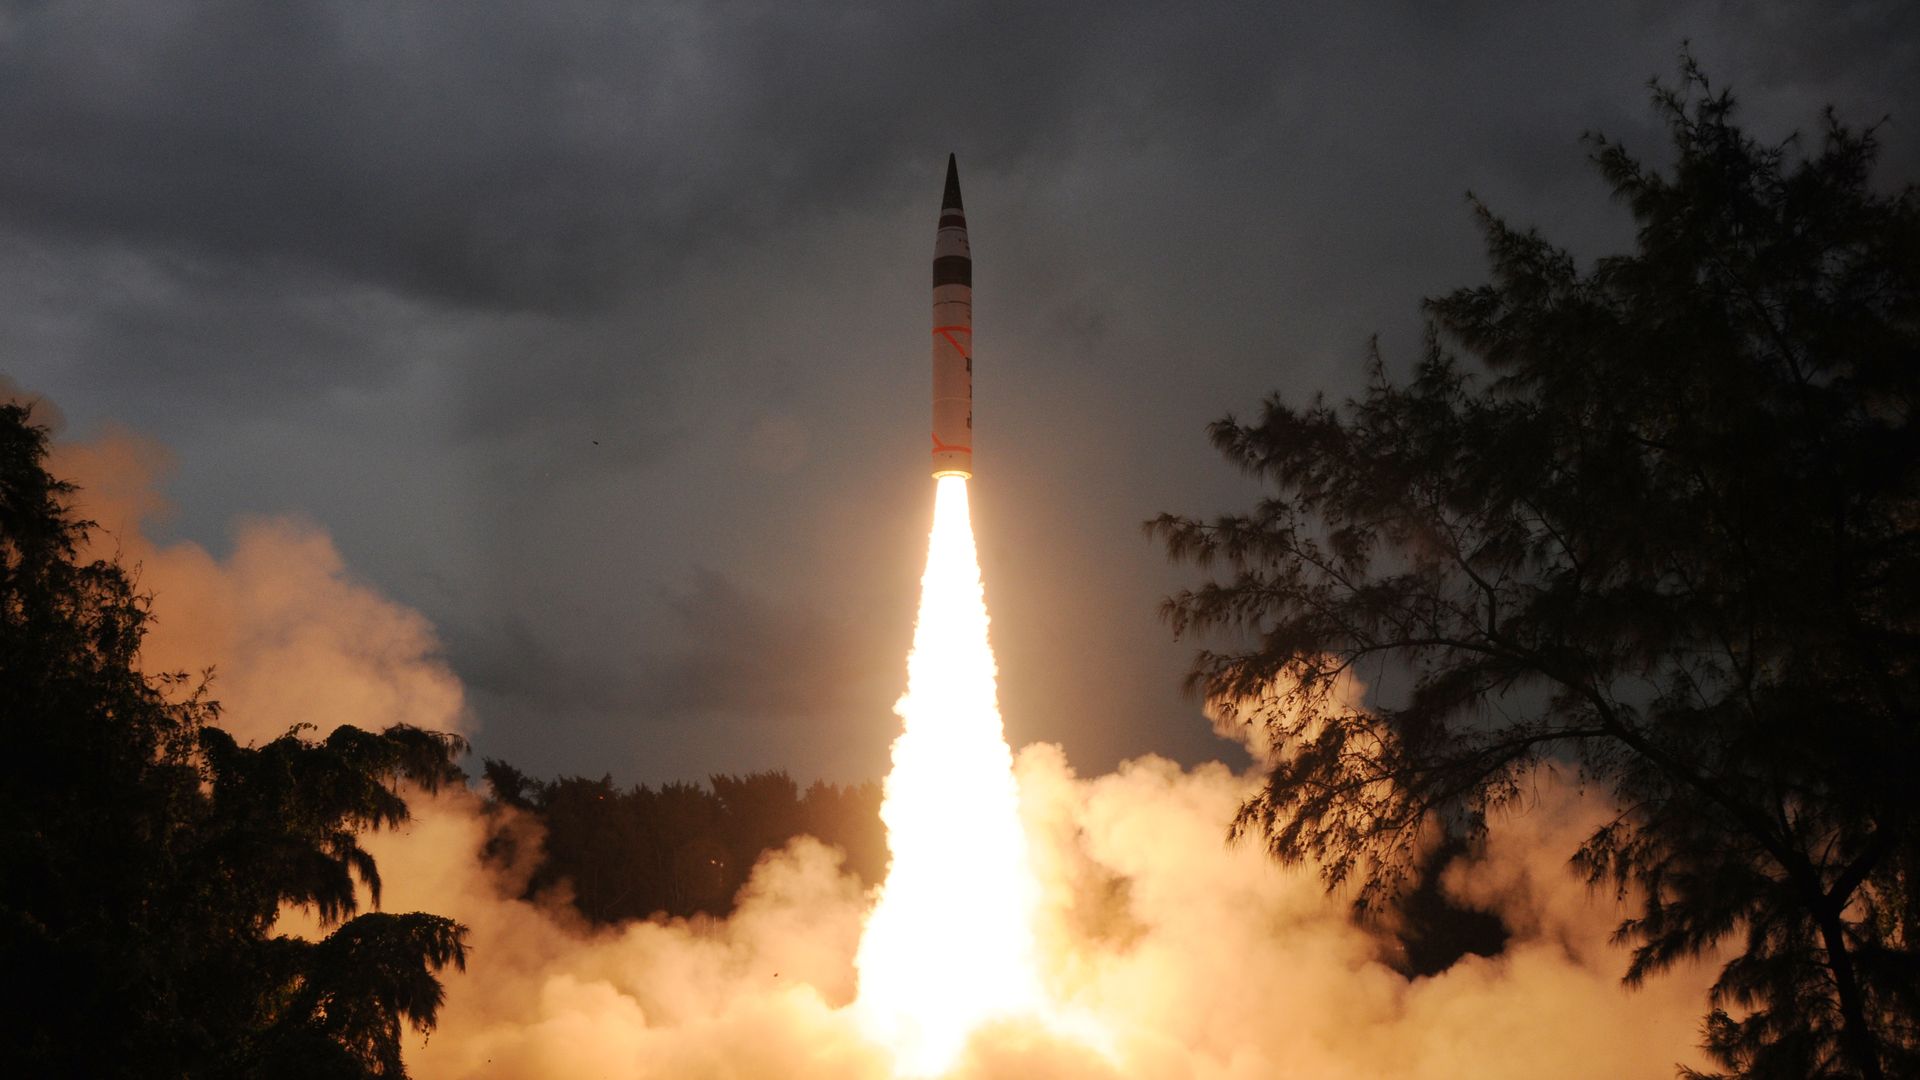 Image of a nuclear-capable Indian missile being test-launched.